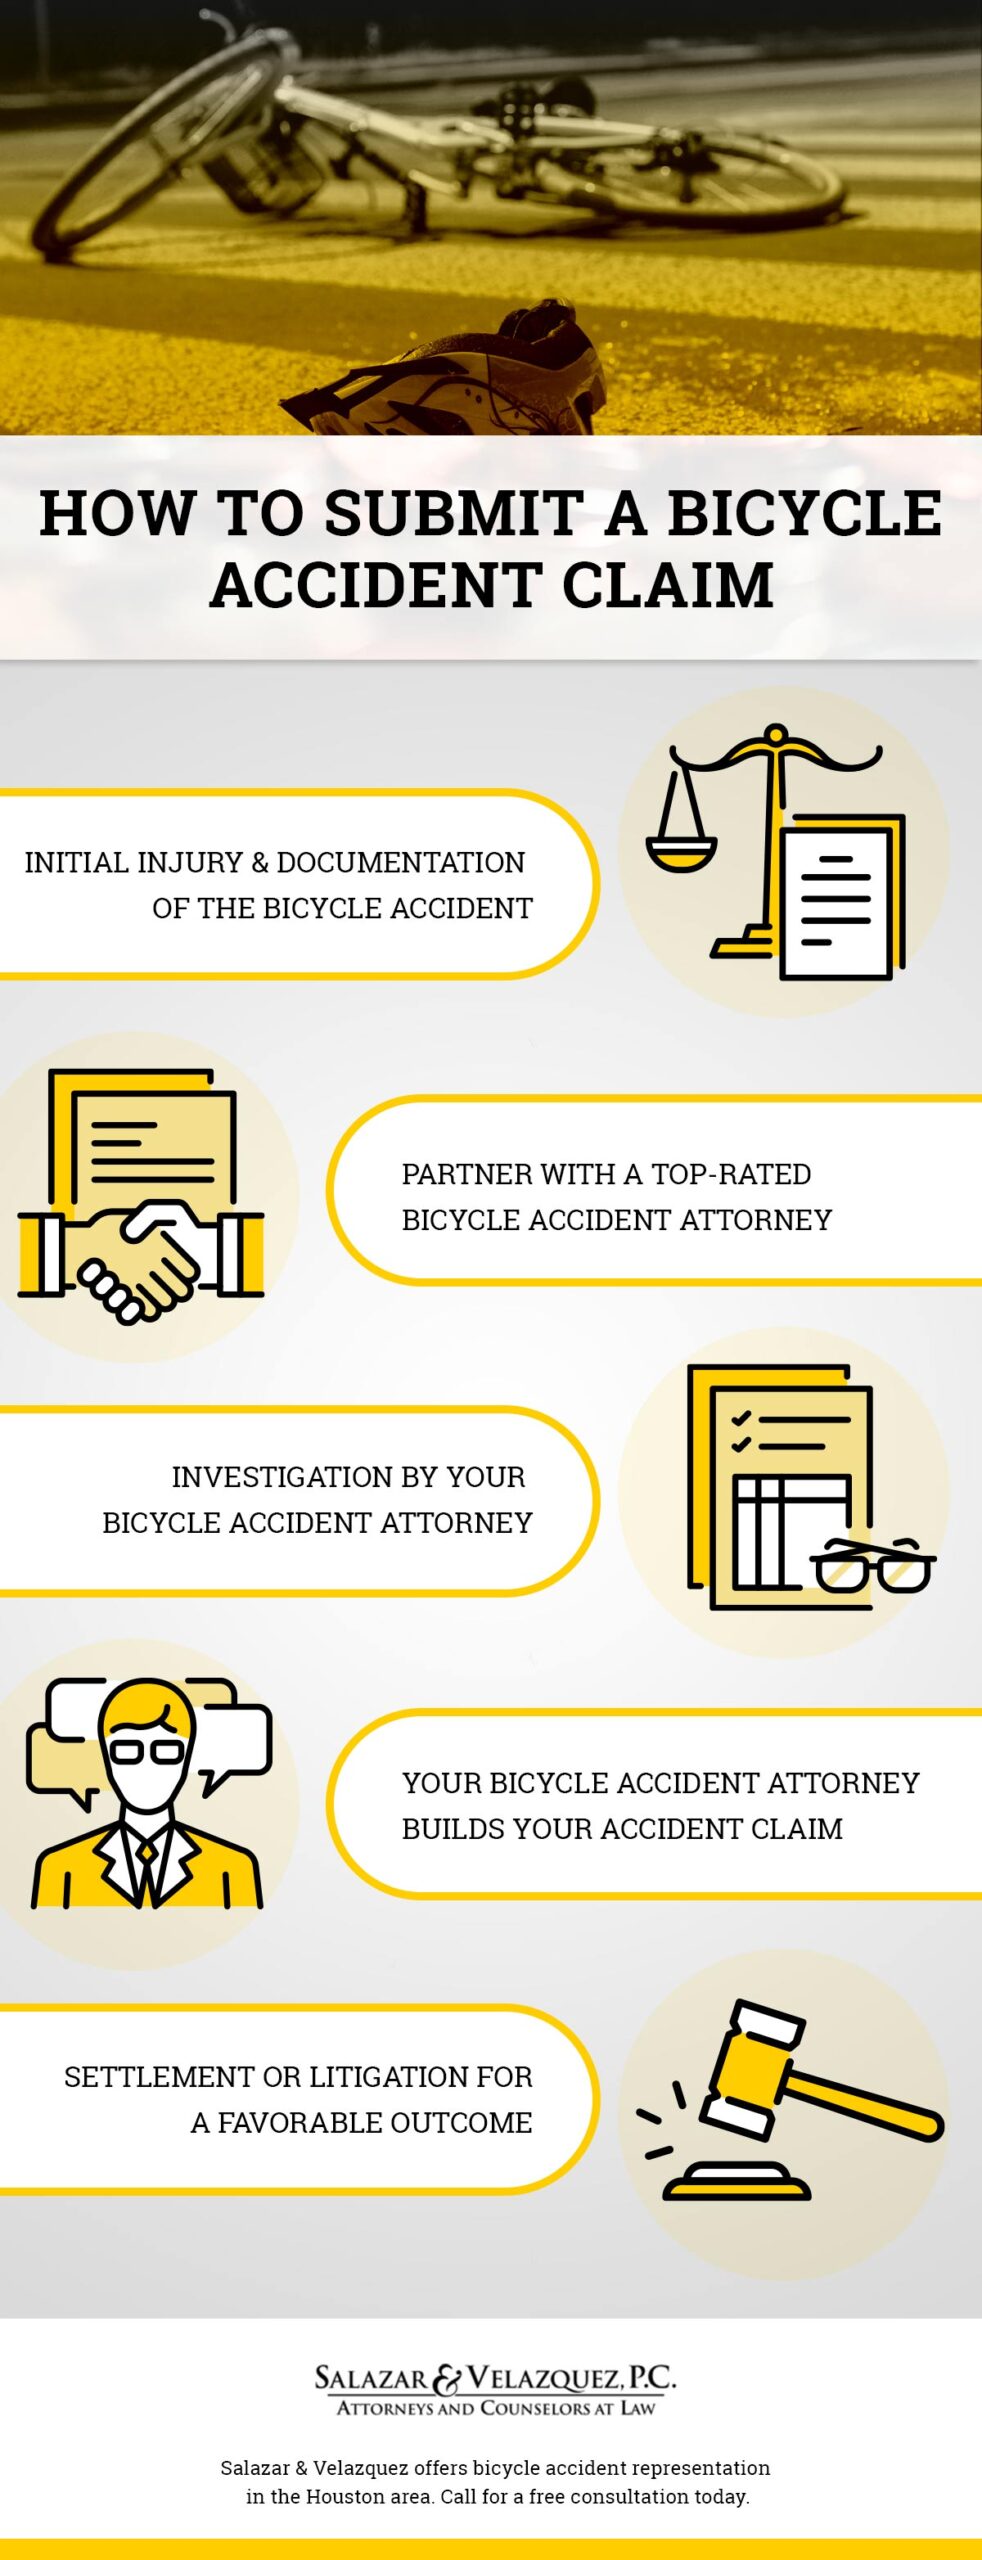 How to Submit a Bicycle Accident Claim